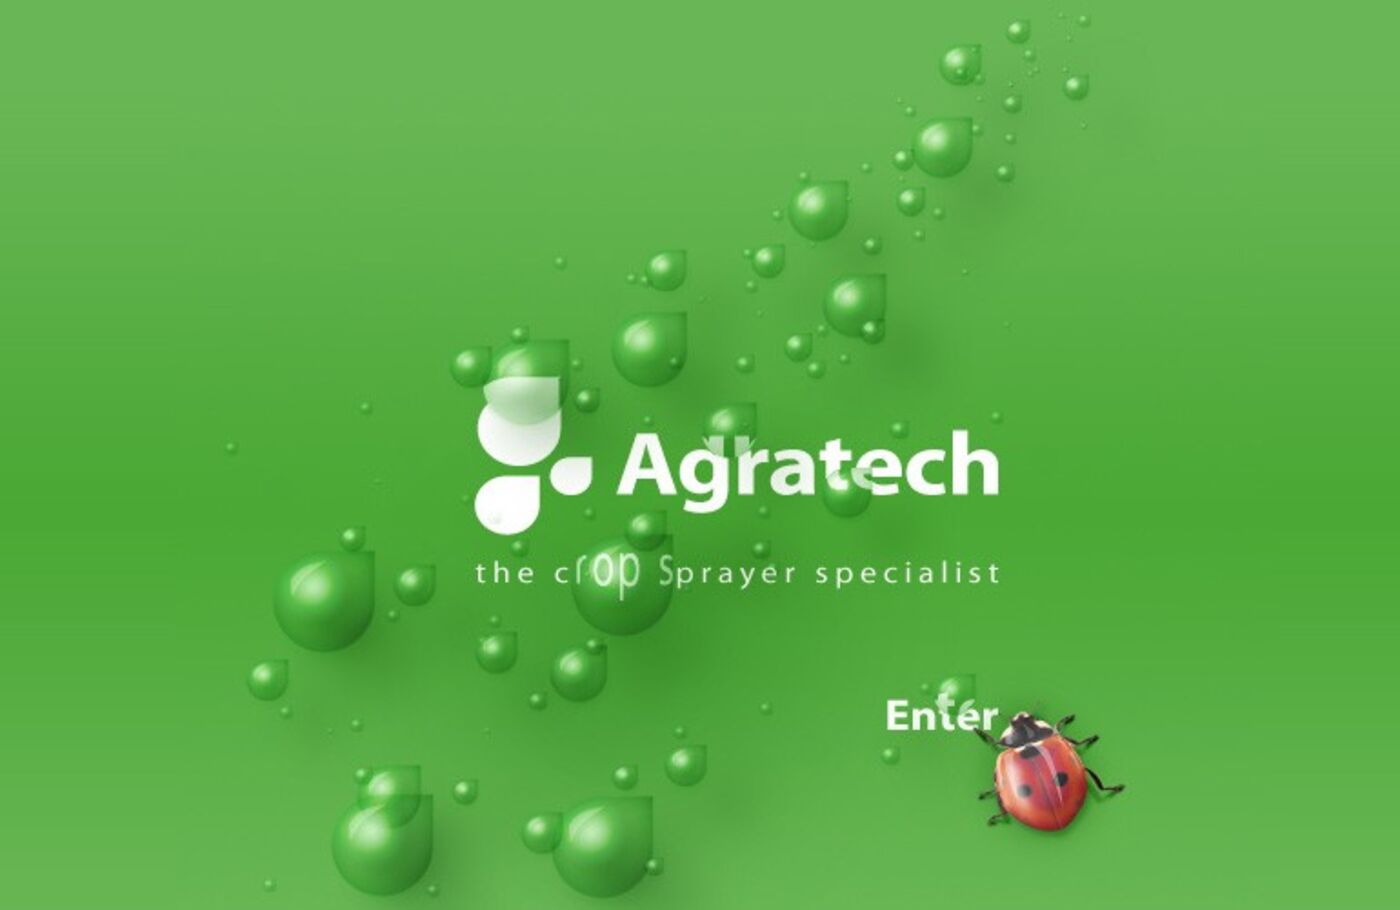 Agratech Services Welcome - Agratech